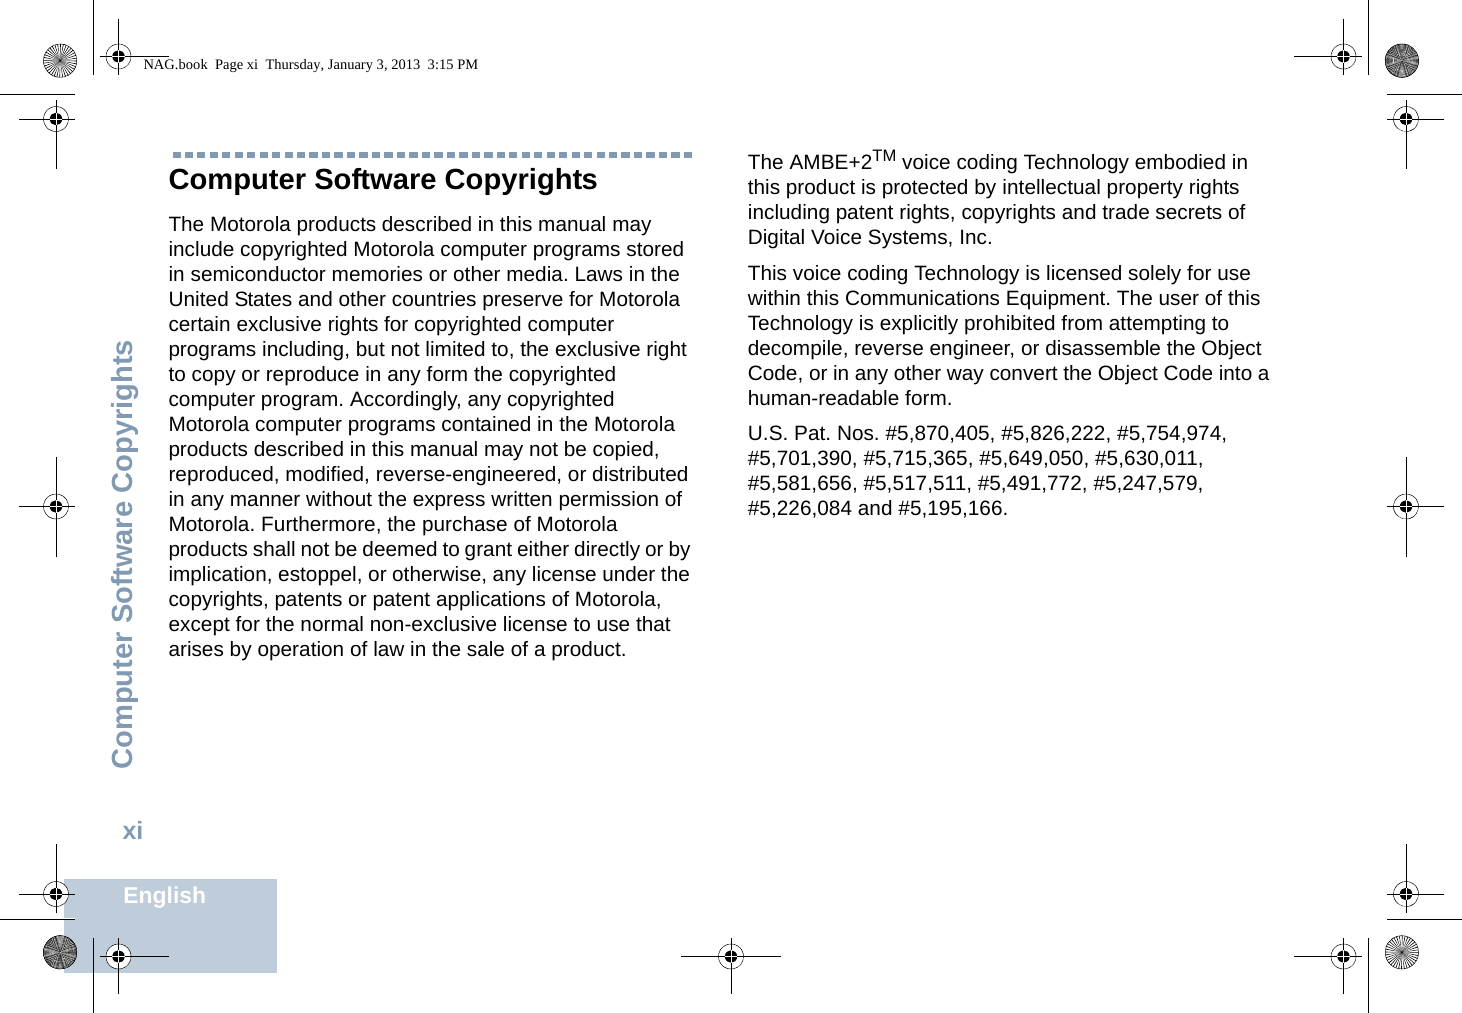 Computer Software CopyrightsEnglishxiComputer Software CopyrightsThe Motorola products described in this manual may include copyrighted Motorola computer programs stored in semiconductor memories or other media. Laws in the United States and other countries preserve for Motorola certain exclusive rights for copyrighted computer programs including, but not limited to, the exclusive right to copy or reproduce in any form the copyrighted computer program. Accordingly, any copyrighted Motorola computer programs contained in the Motorola products described in this manual may not be copied, reproduced, modified, reverse-engineered, or distributed in any manner without the express written permission of Motorola. Furthermore, the purchase of Motorola products shall not be deemed to grant either directly or by implication, estoppel, or otherwise, any license under the copyrights, patents or patent applications of Motorola, except for the normal non-exclusive license to use that arises by operation of law in the sale of a product.The AMBE+2TM voice coding Technology embodied in this product is protected by intellectual property rights including patent rights, copyrights and trade secrets of Digital Voice Systems, Inc. This voice coding Technology is licensed solely for use within this Communications Equipment. The user of this Technology is explicitly prohibited from attempting to decompile, reverse engineer, or disassemble the Object Code, or in any other way convert the Object Code into a human-readable form. U.S. Pat. Nos. #5,870,405, #5,826,222, #5,754,974, #5,701,390, #5,715,365, #5,649,050, #5,630,011, #5,581,656, #5,517,511, #5,491,772, #5,247,579, #5,226,084 and #5,195,166.NAG.book  Page xi  Thursday, January 3, 2013  3:15 PM